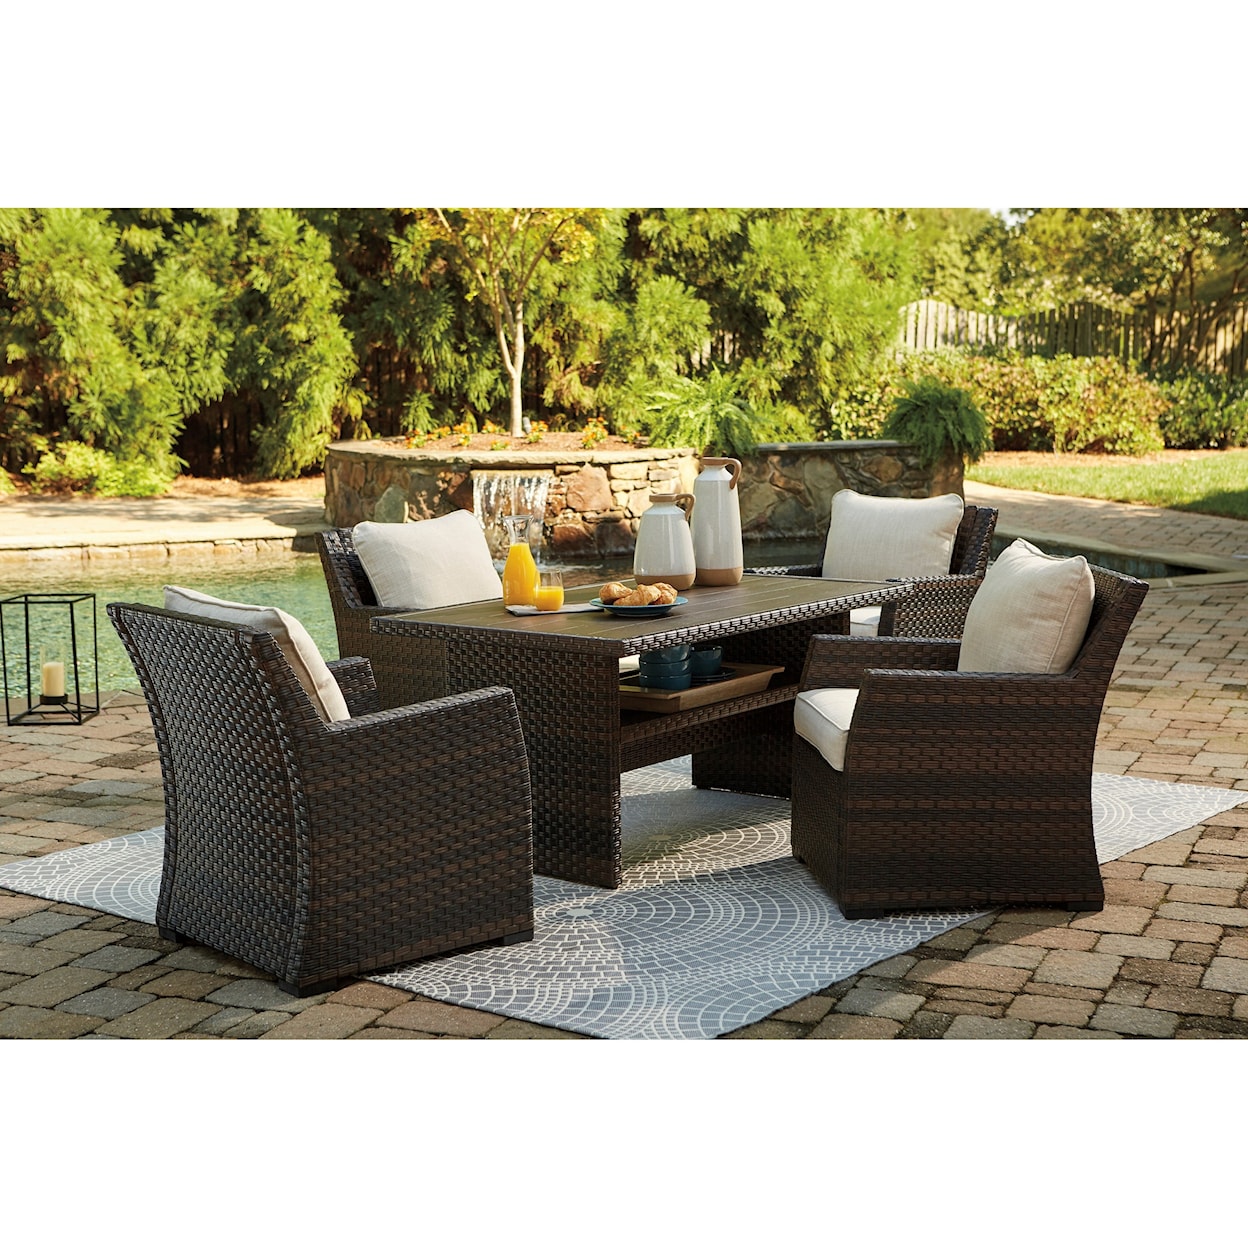 Benchcraft Easy Isle Multi-Use Table & 4 Lounge Chairs